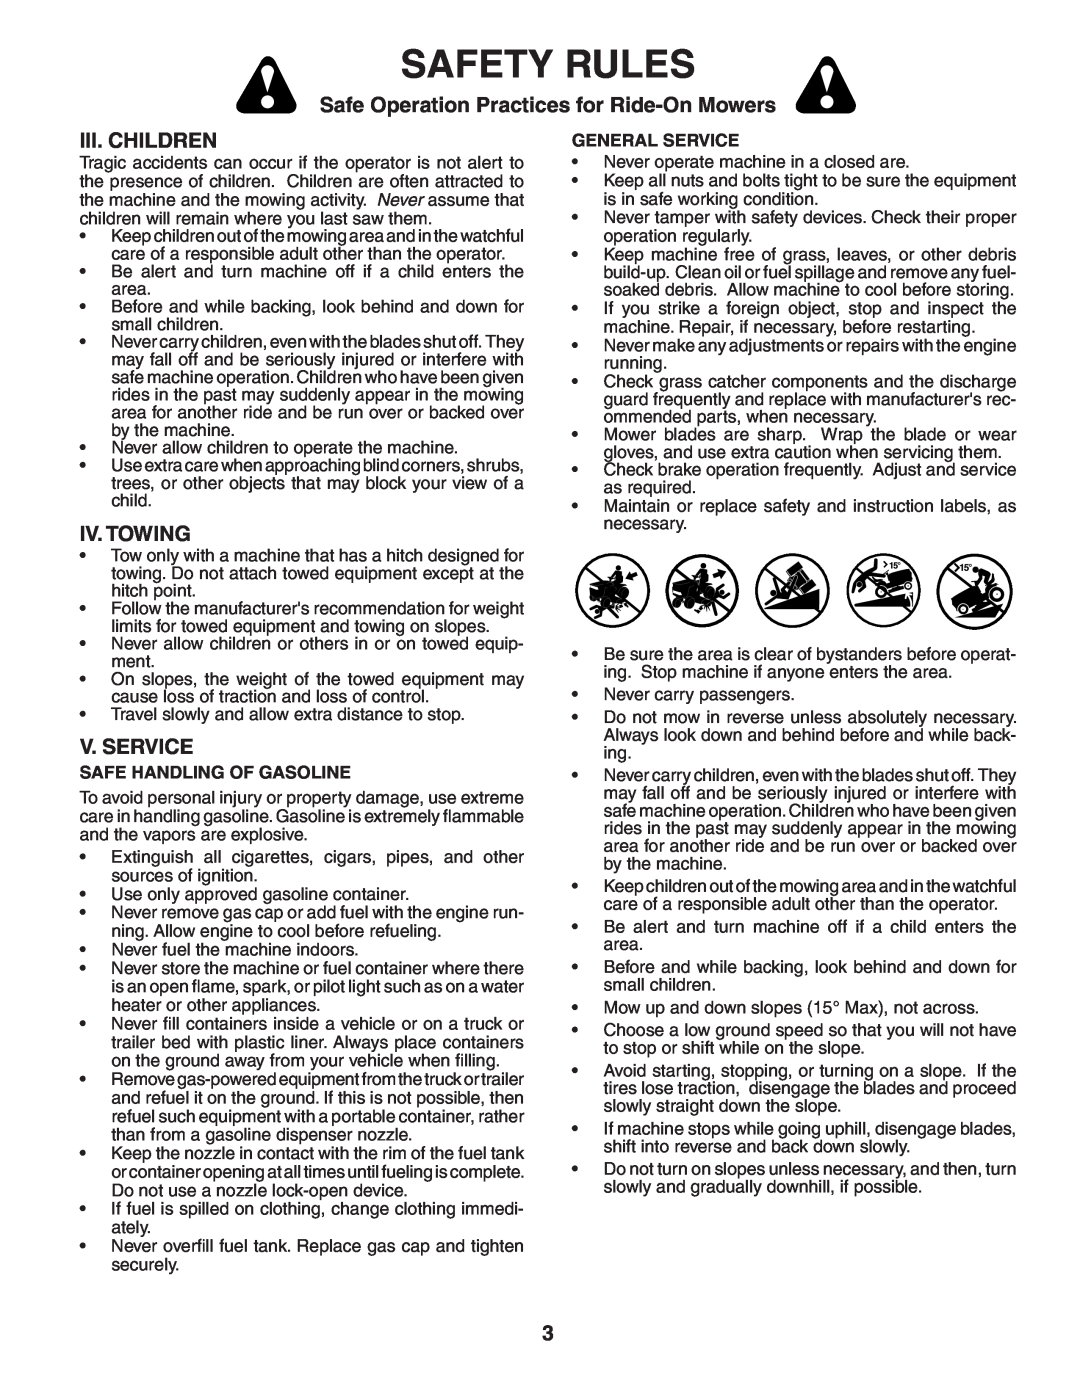 Poulan PKGTH2554 manual Iii. Children, Iv. Towing, V. Service, Safety Rules, Safe Operation Practices for Ride-On Mowers 